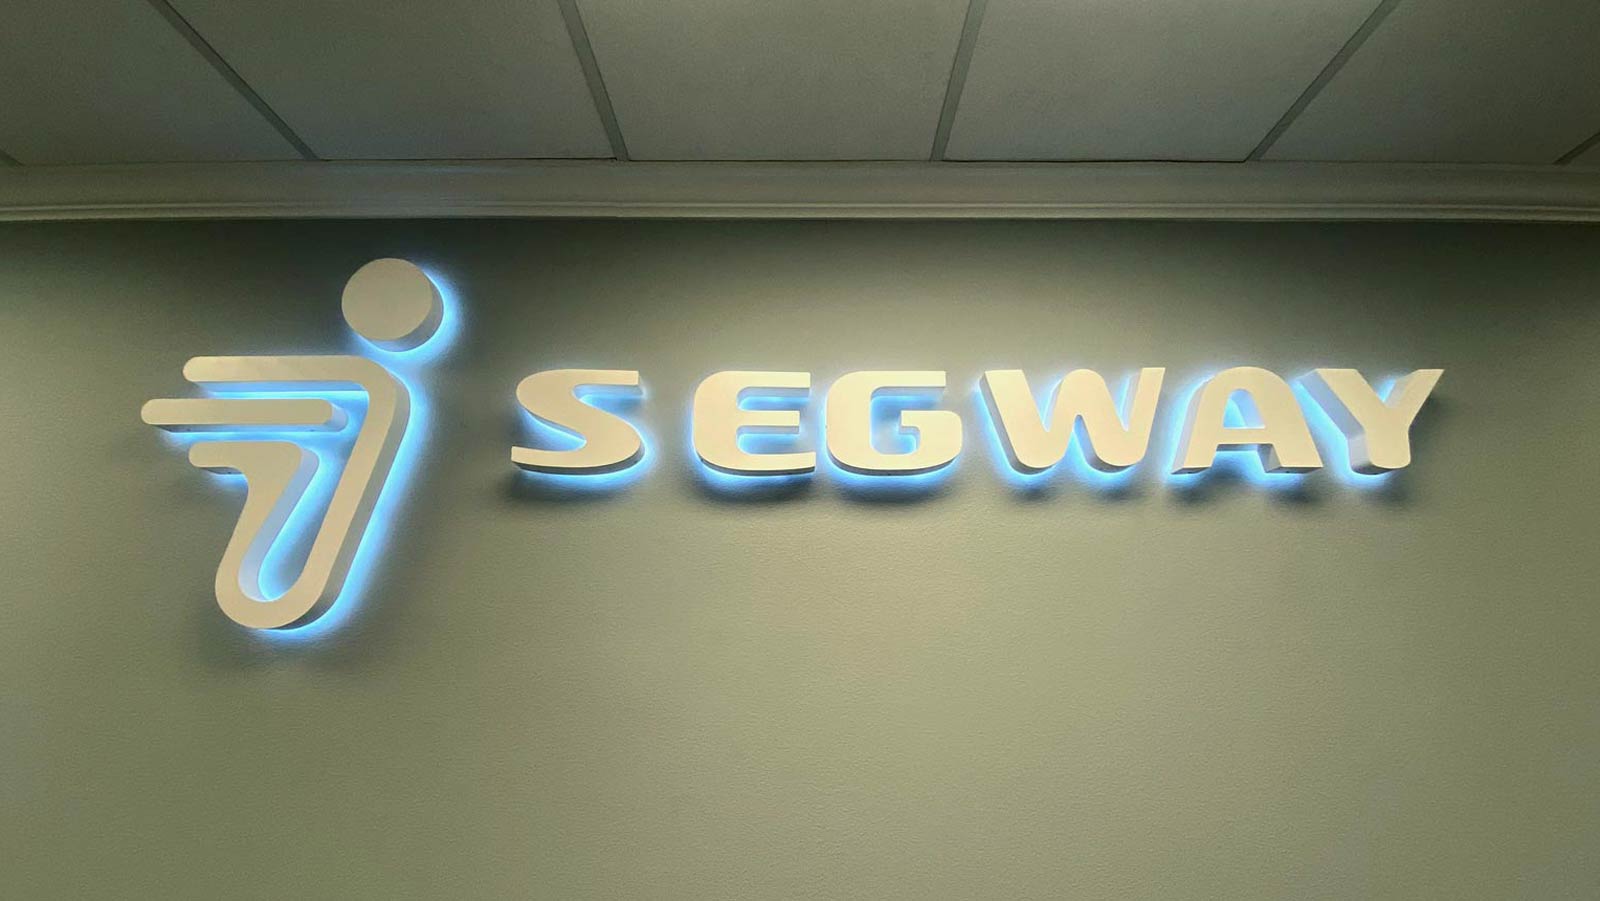 segway store sign attached to the indoor wall